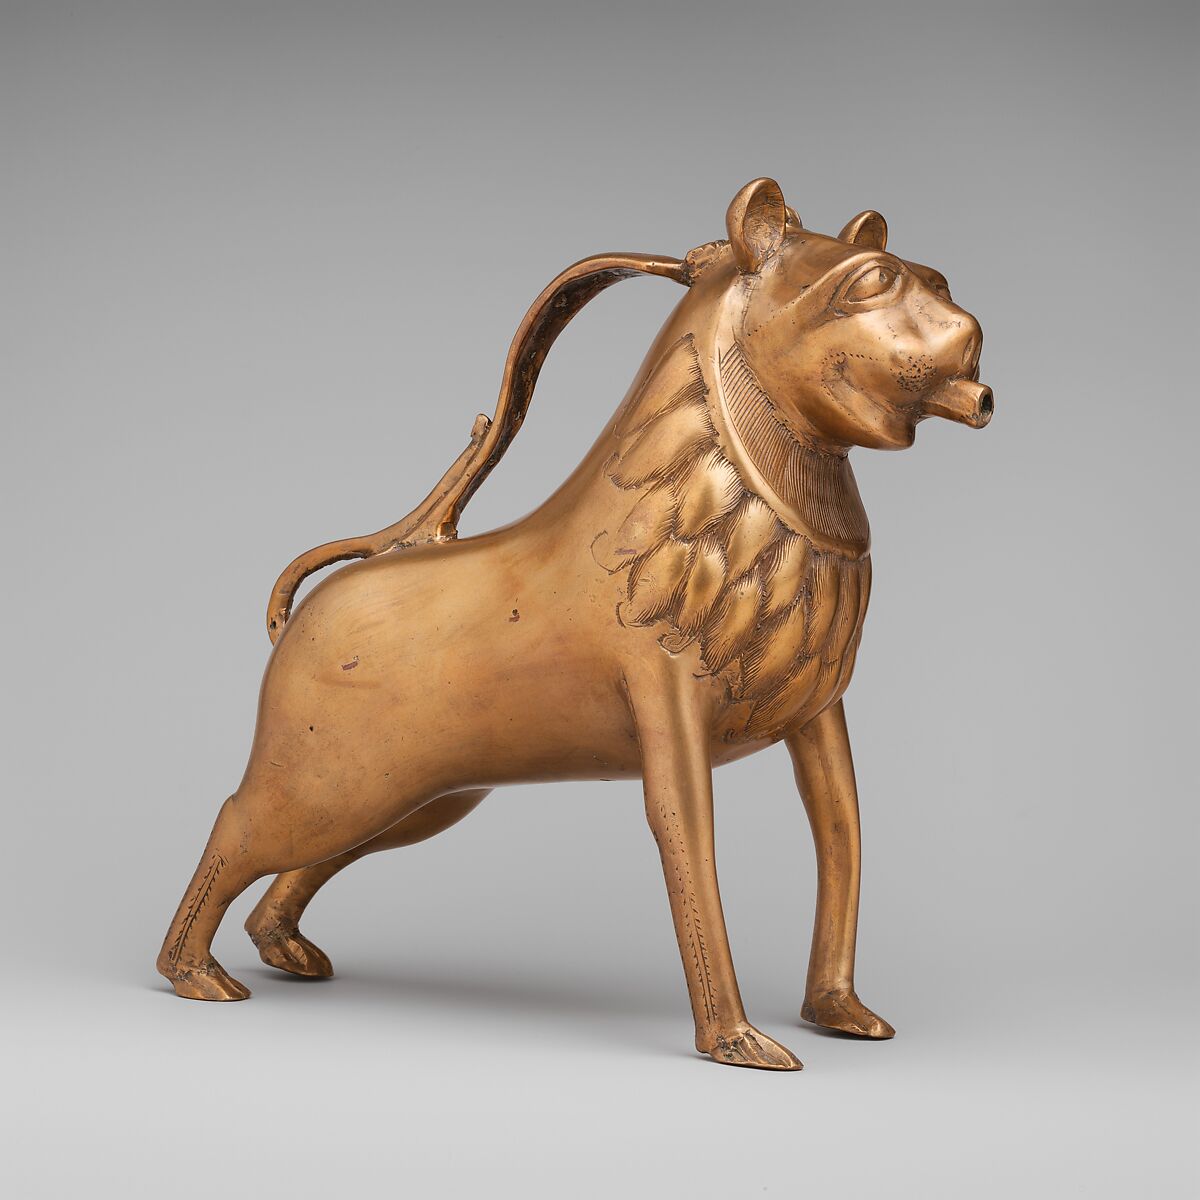 Aquamanile in the Form of a Lion, Copper alloy, German 